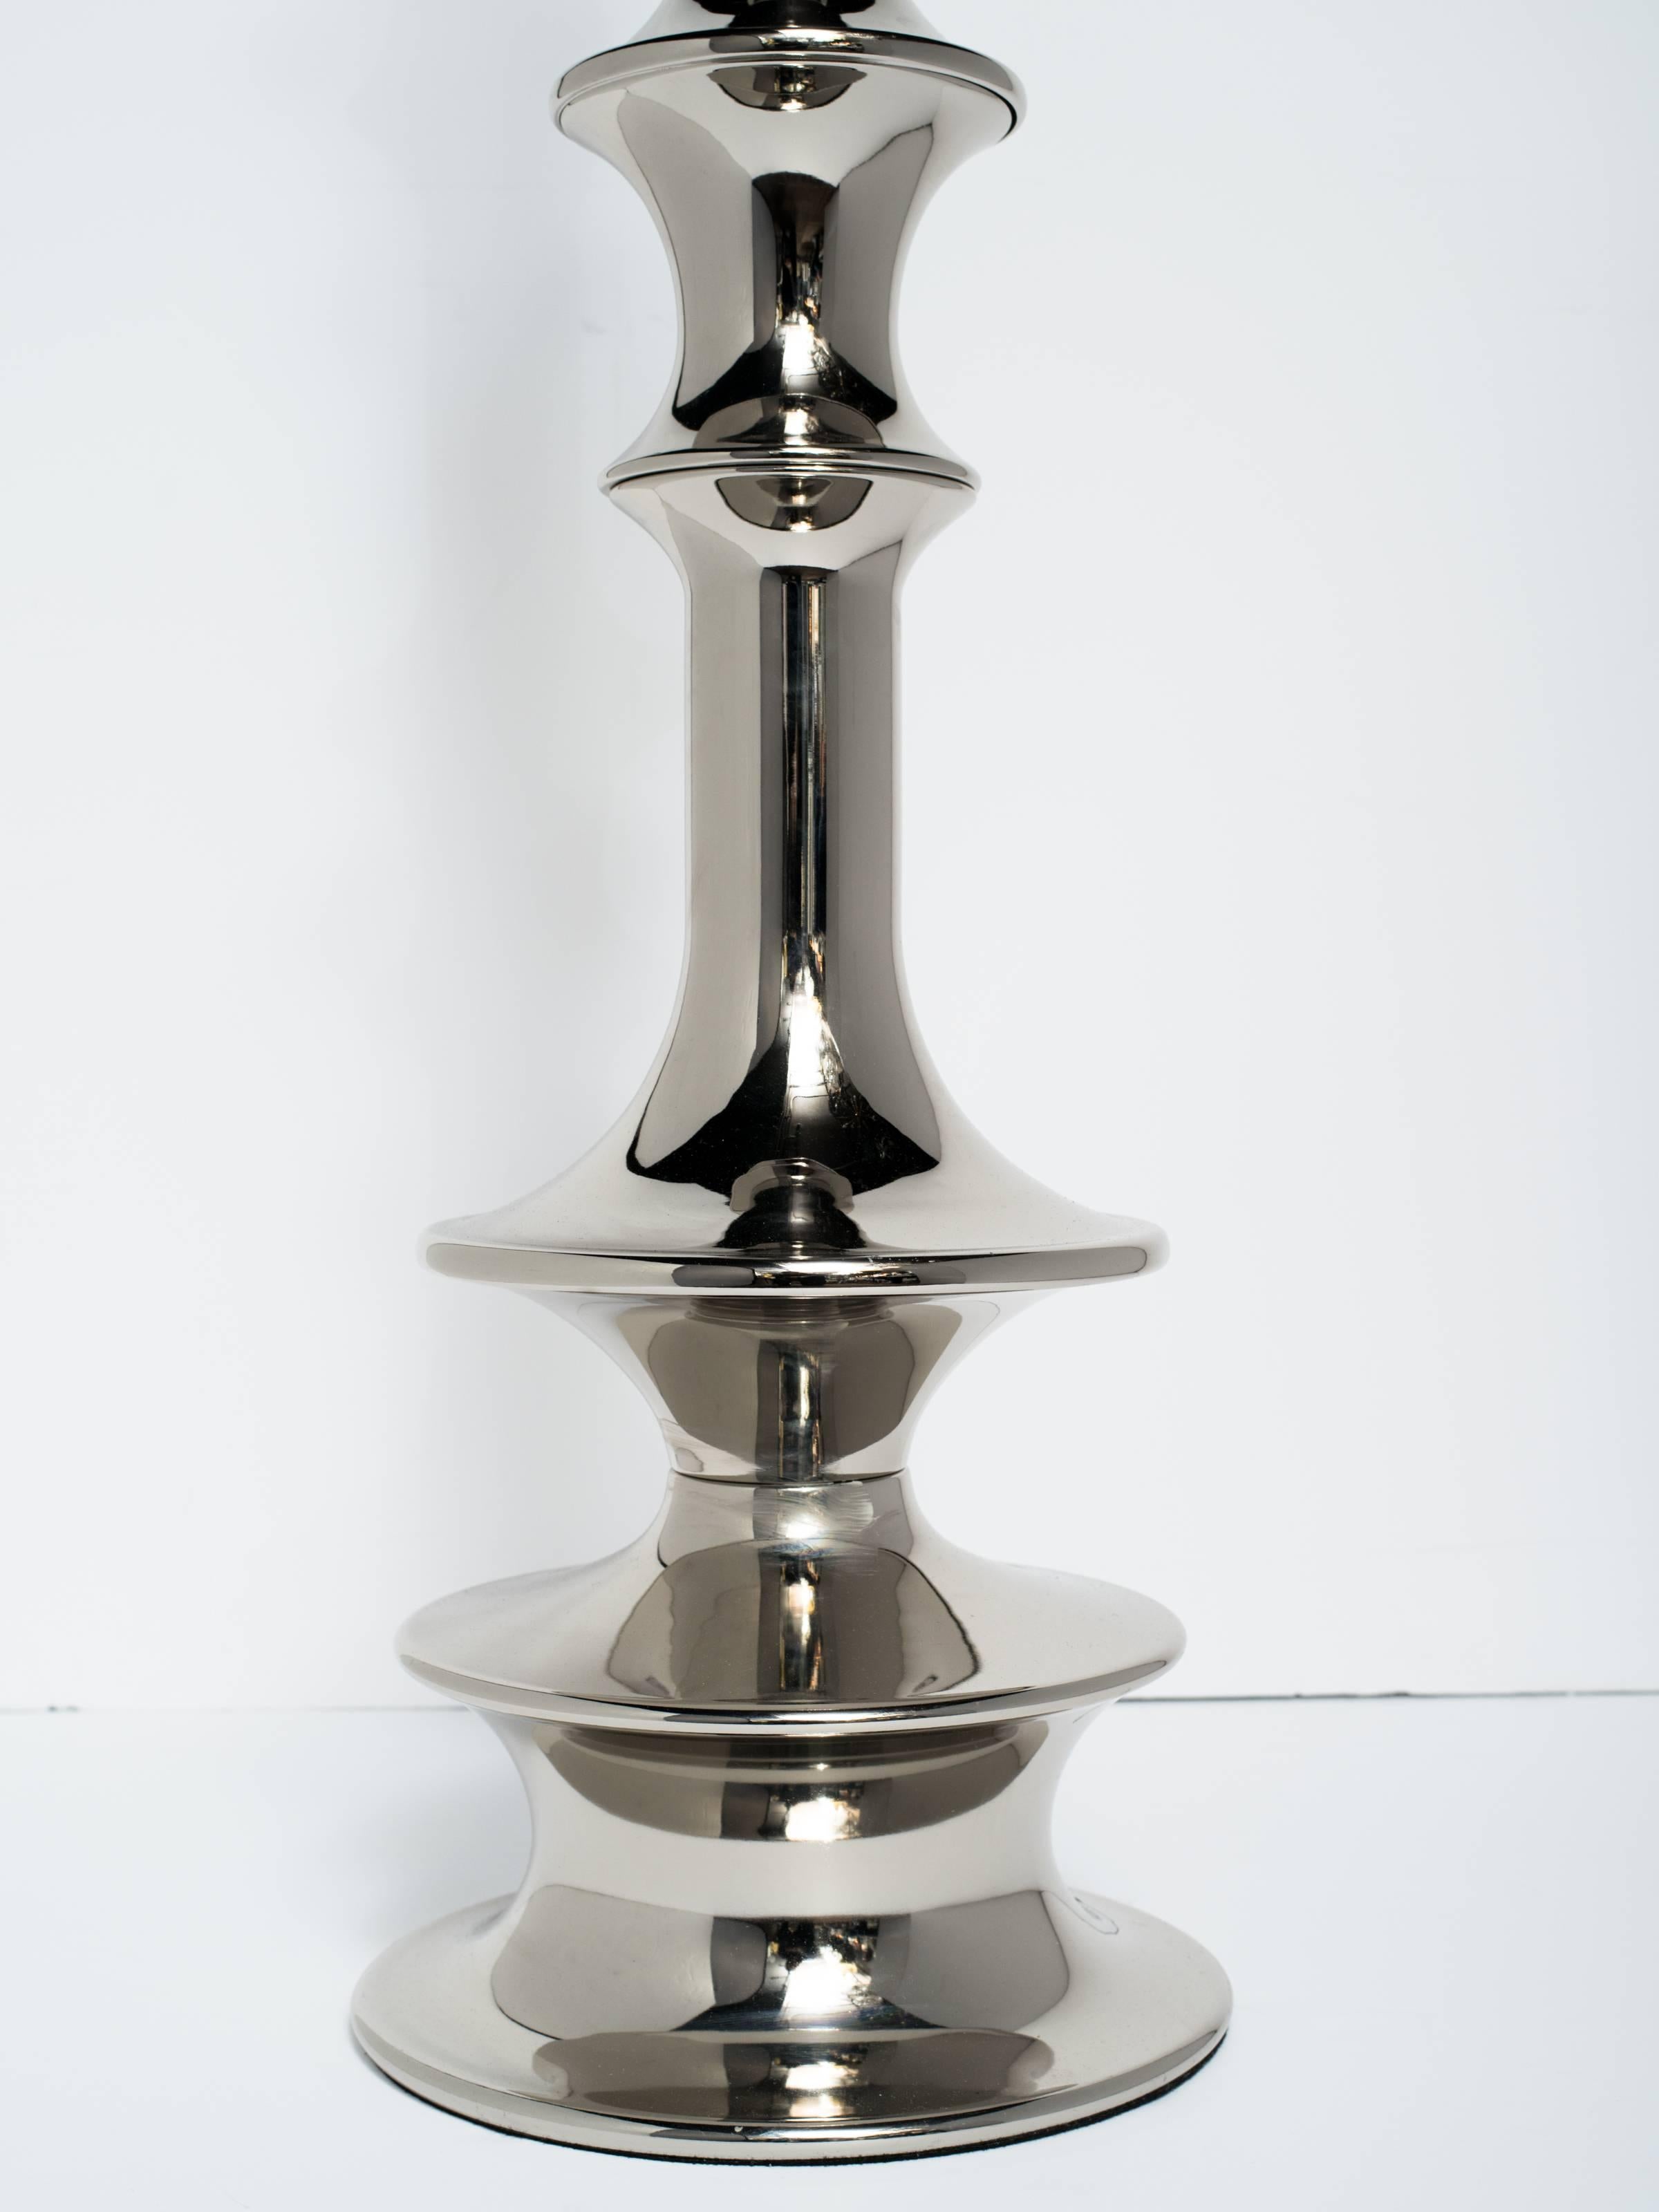 Polished Pair of Sculptural Chess Piece Floor Lamps in Nickel, c. 1980's For Sale